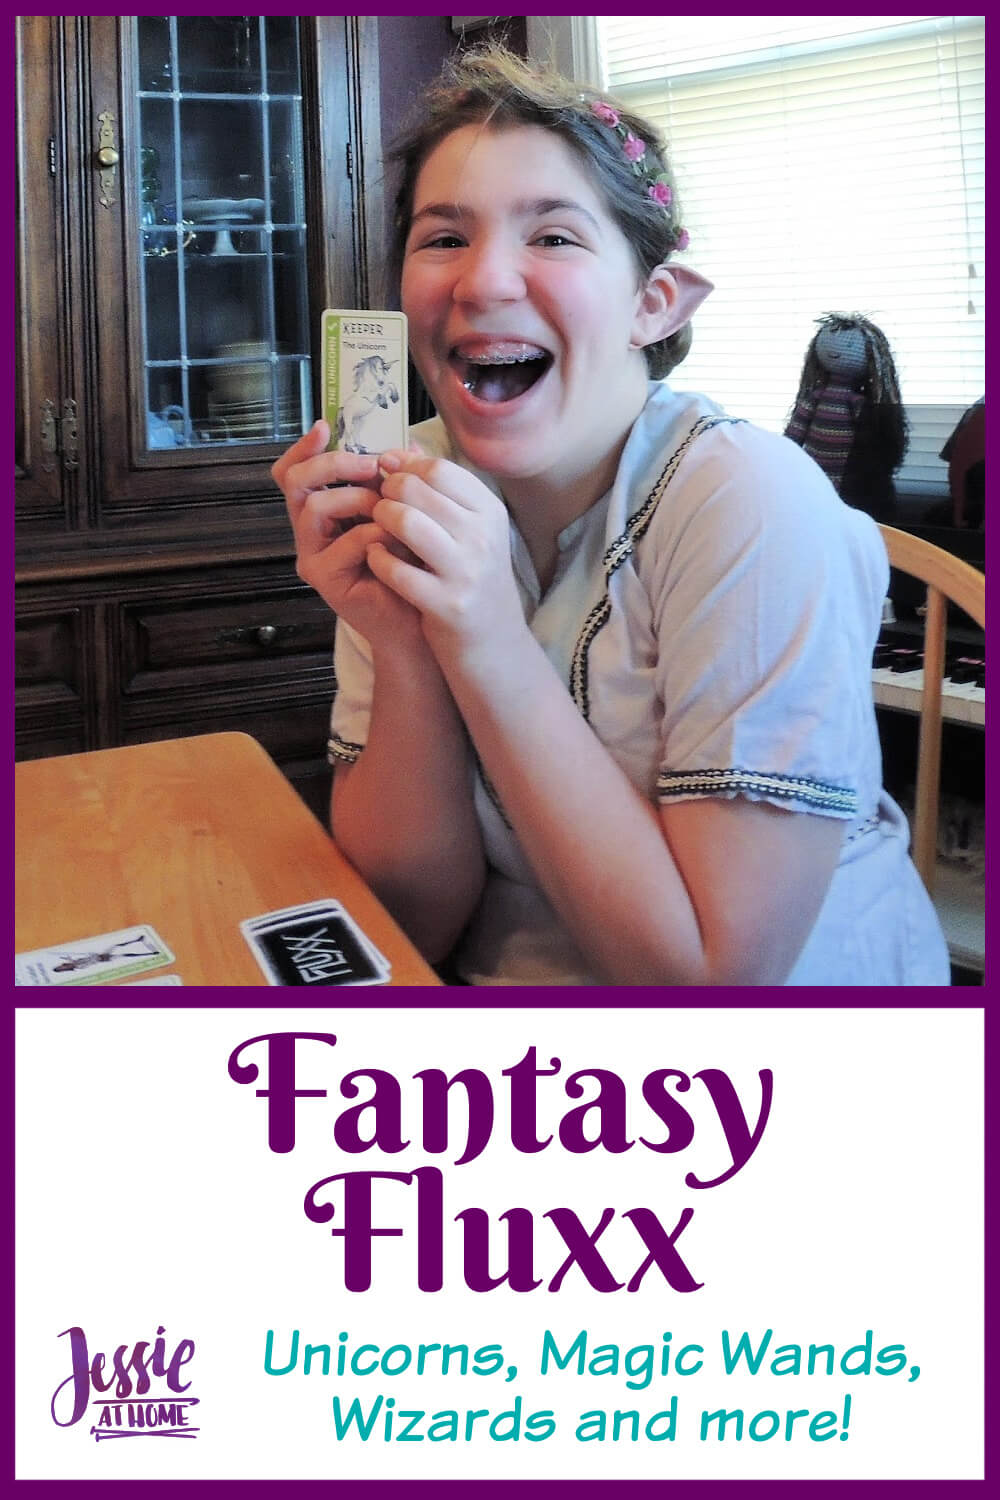 Fantasy Fluxx - Unicorns, Magic Wands, Wizards and more!